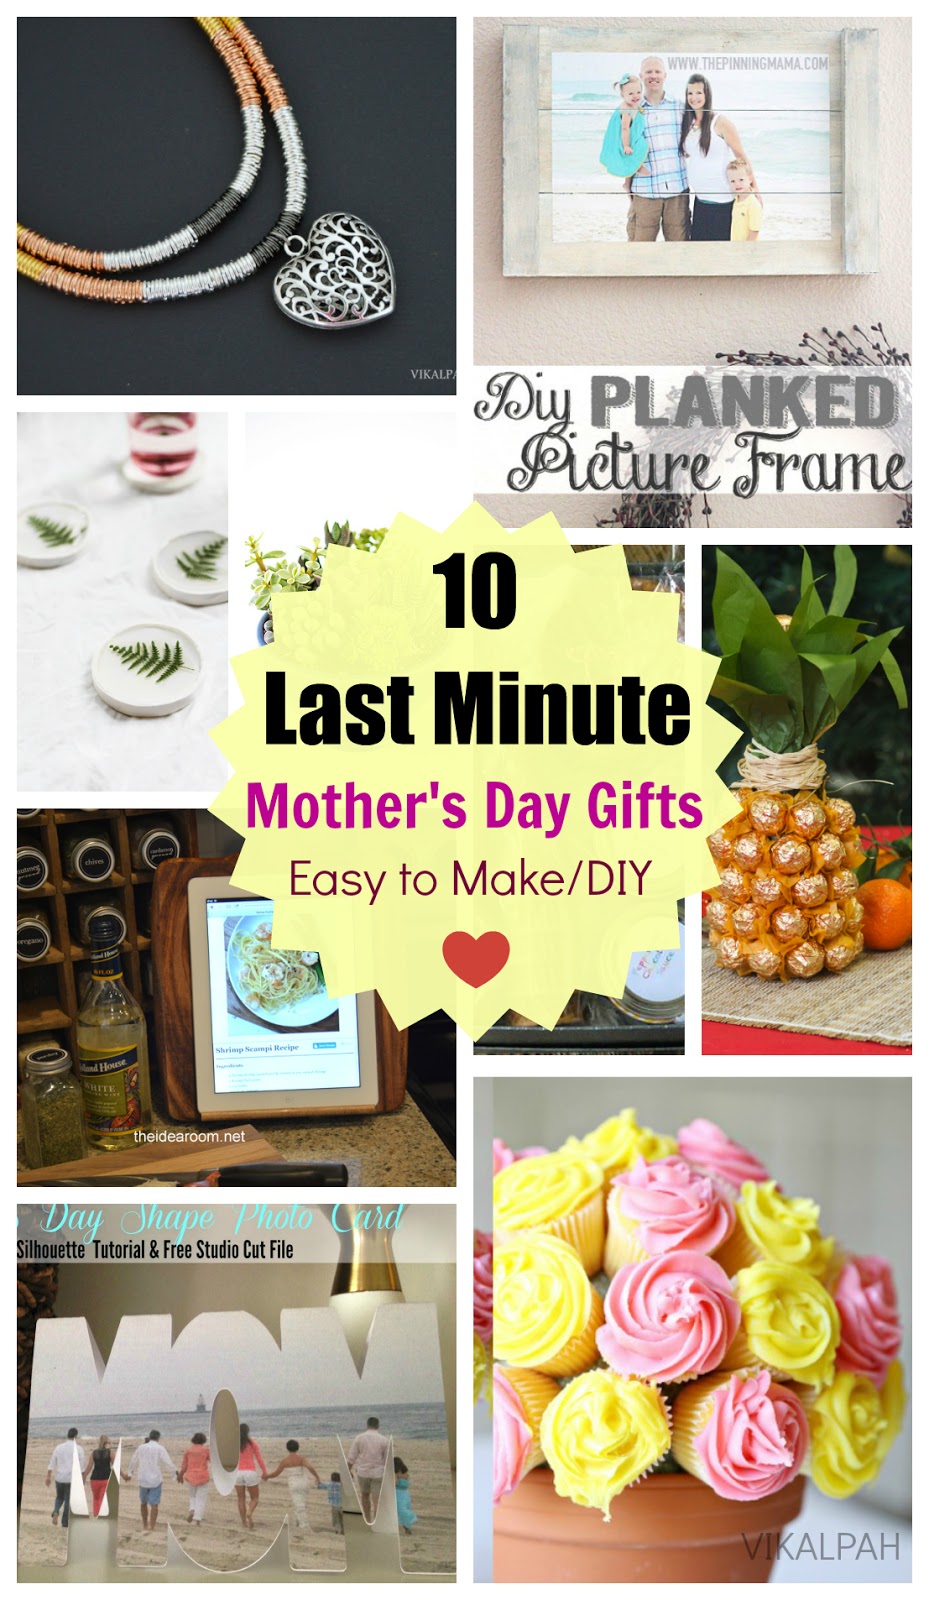 Last Minute Mother's Day Gift Ideas - Let's Be Merry